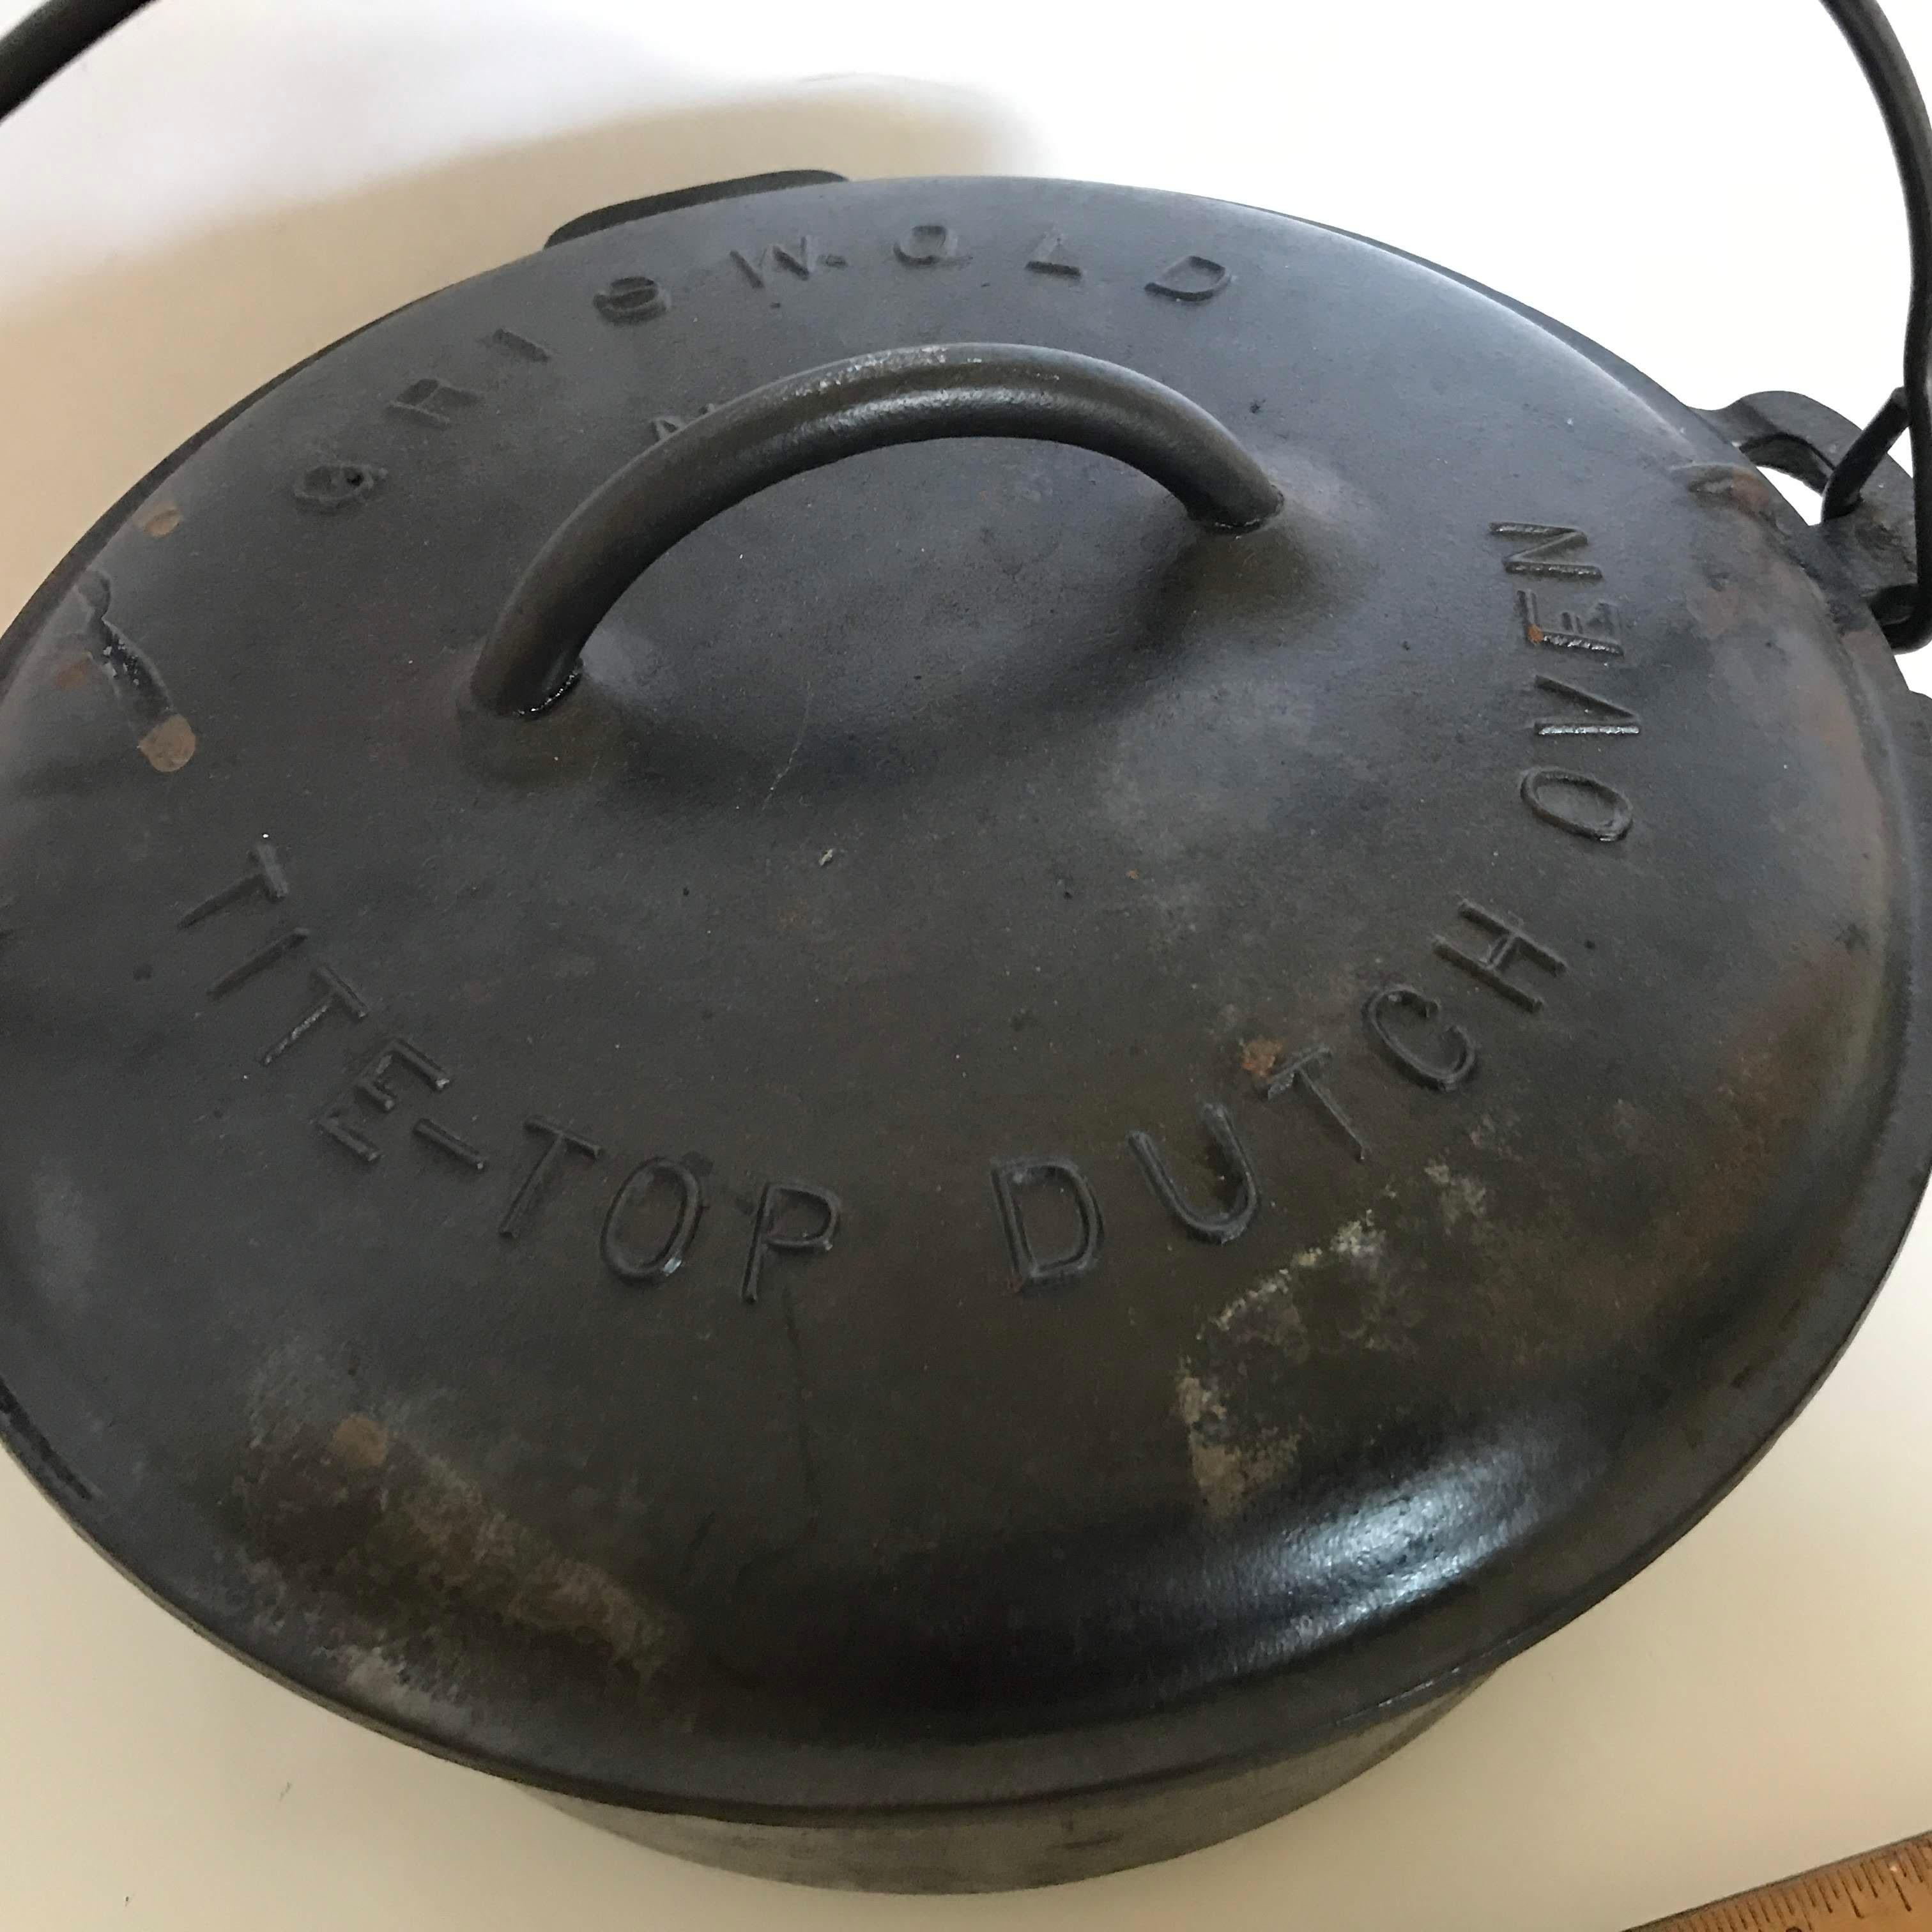 Awesome Griswold Cast Iron Tite-Top Dutch Oven with Lid